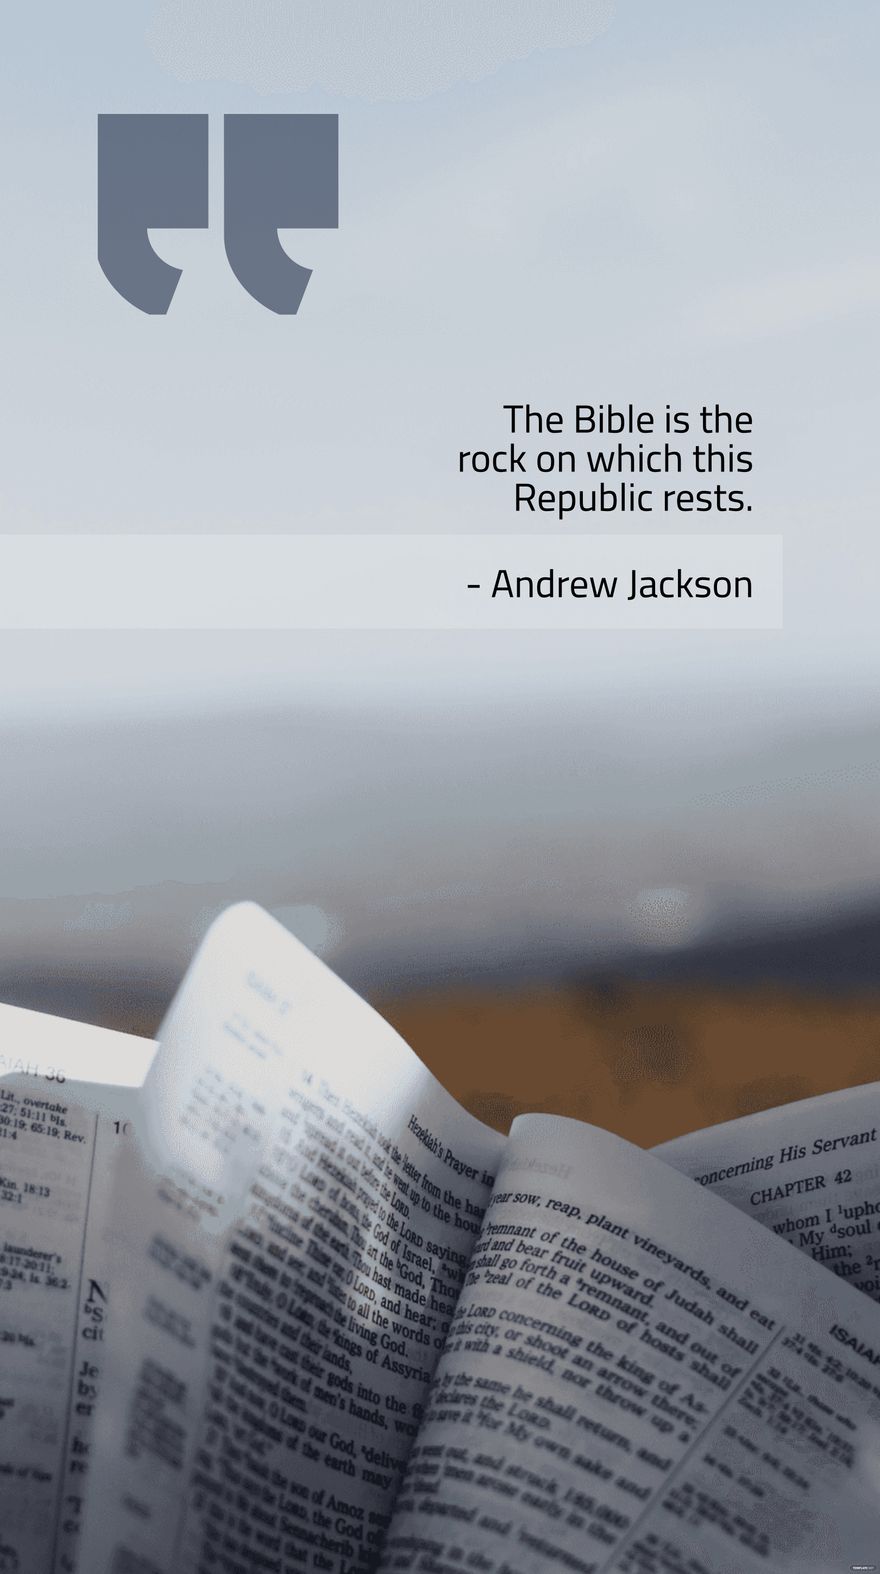 Free The Bible is the rock on which this Republic rests. - Andrew Jackson in JPEG